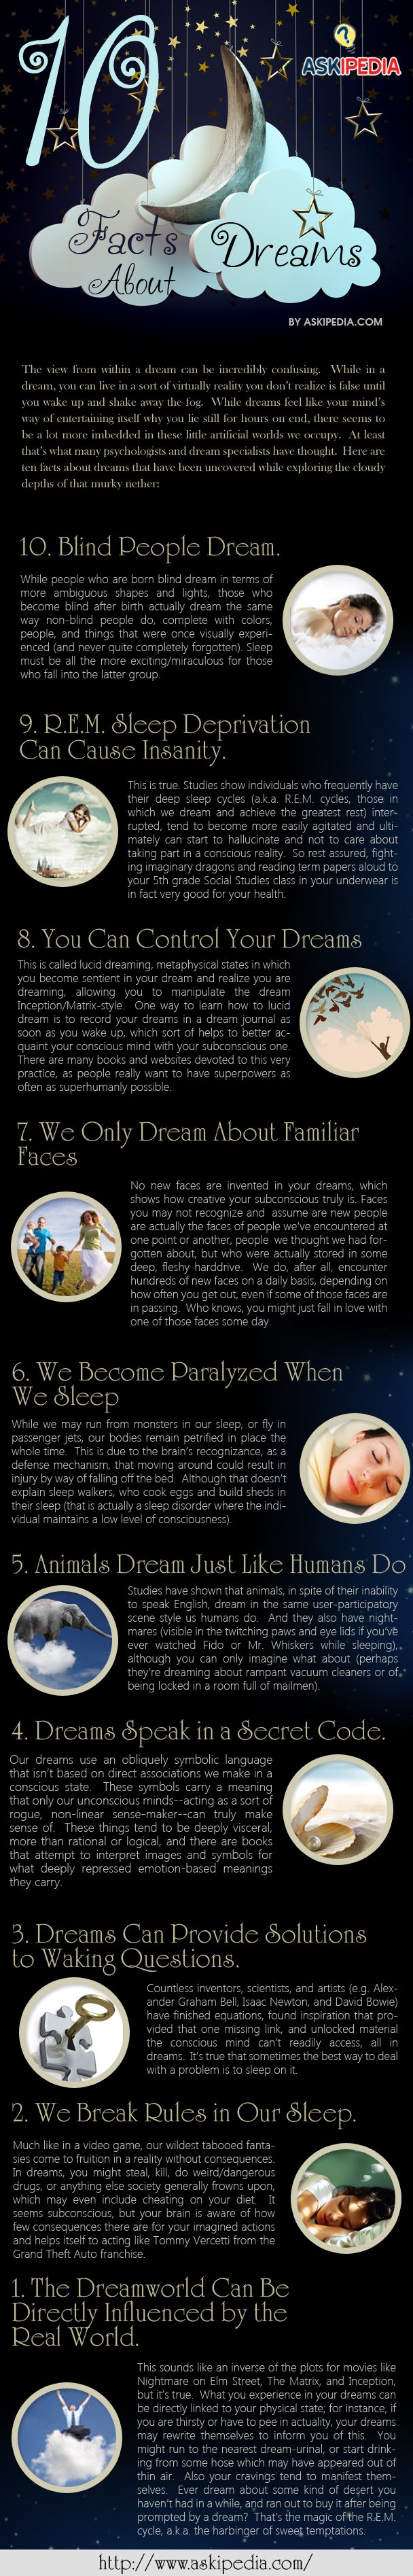 Facts about Dreams.